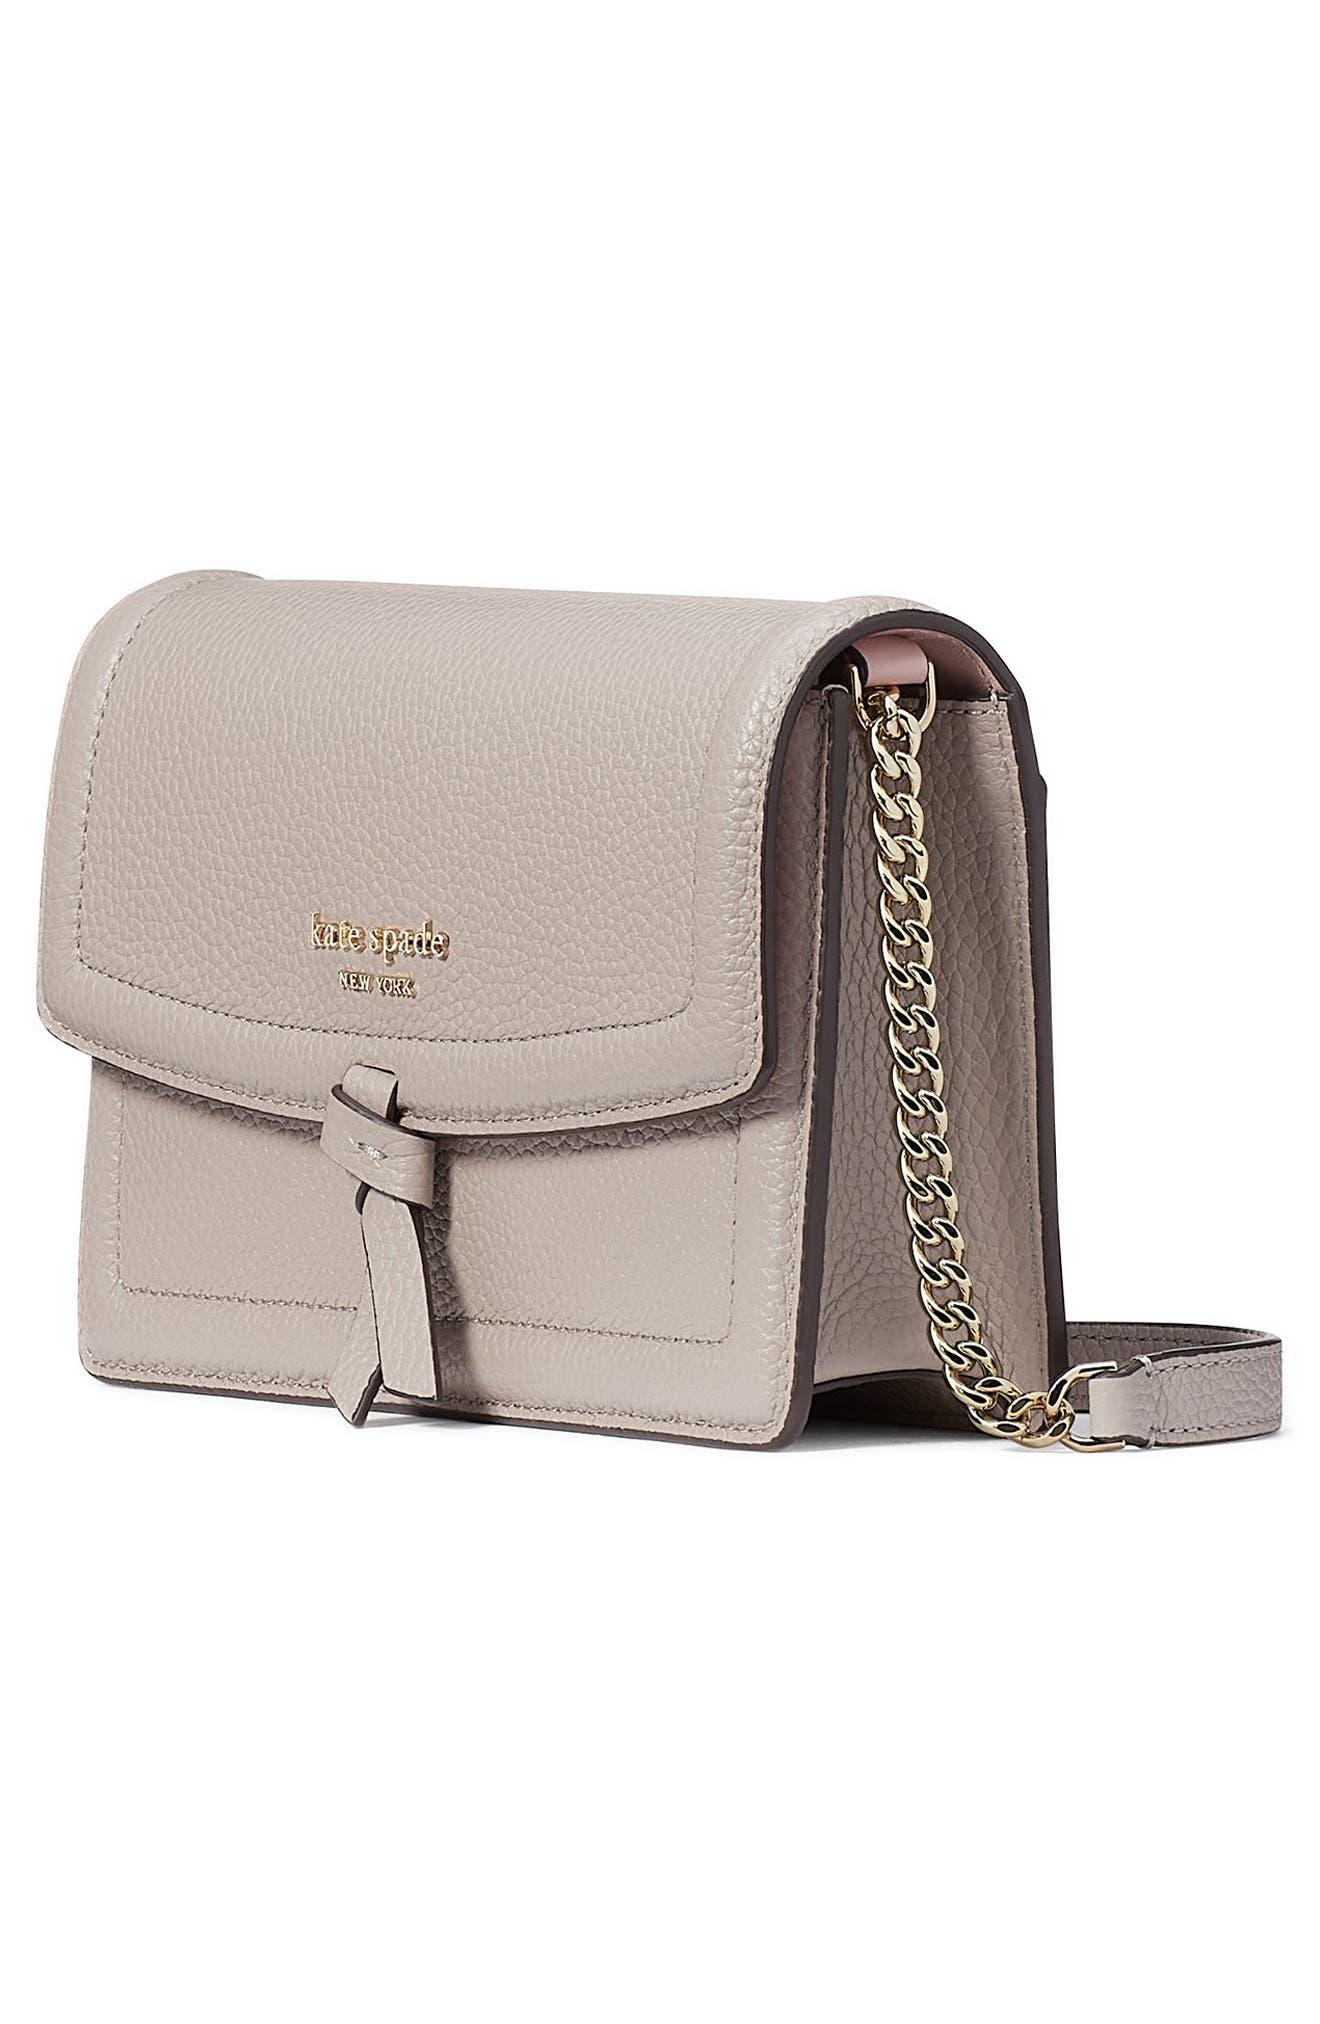 Kate Spade New York Knott Pebbled Leather Crossbody - Warm Taupe